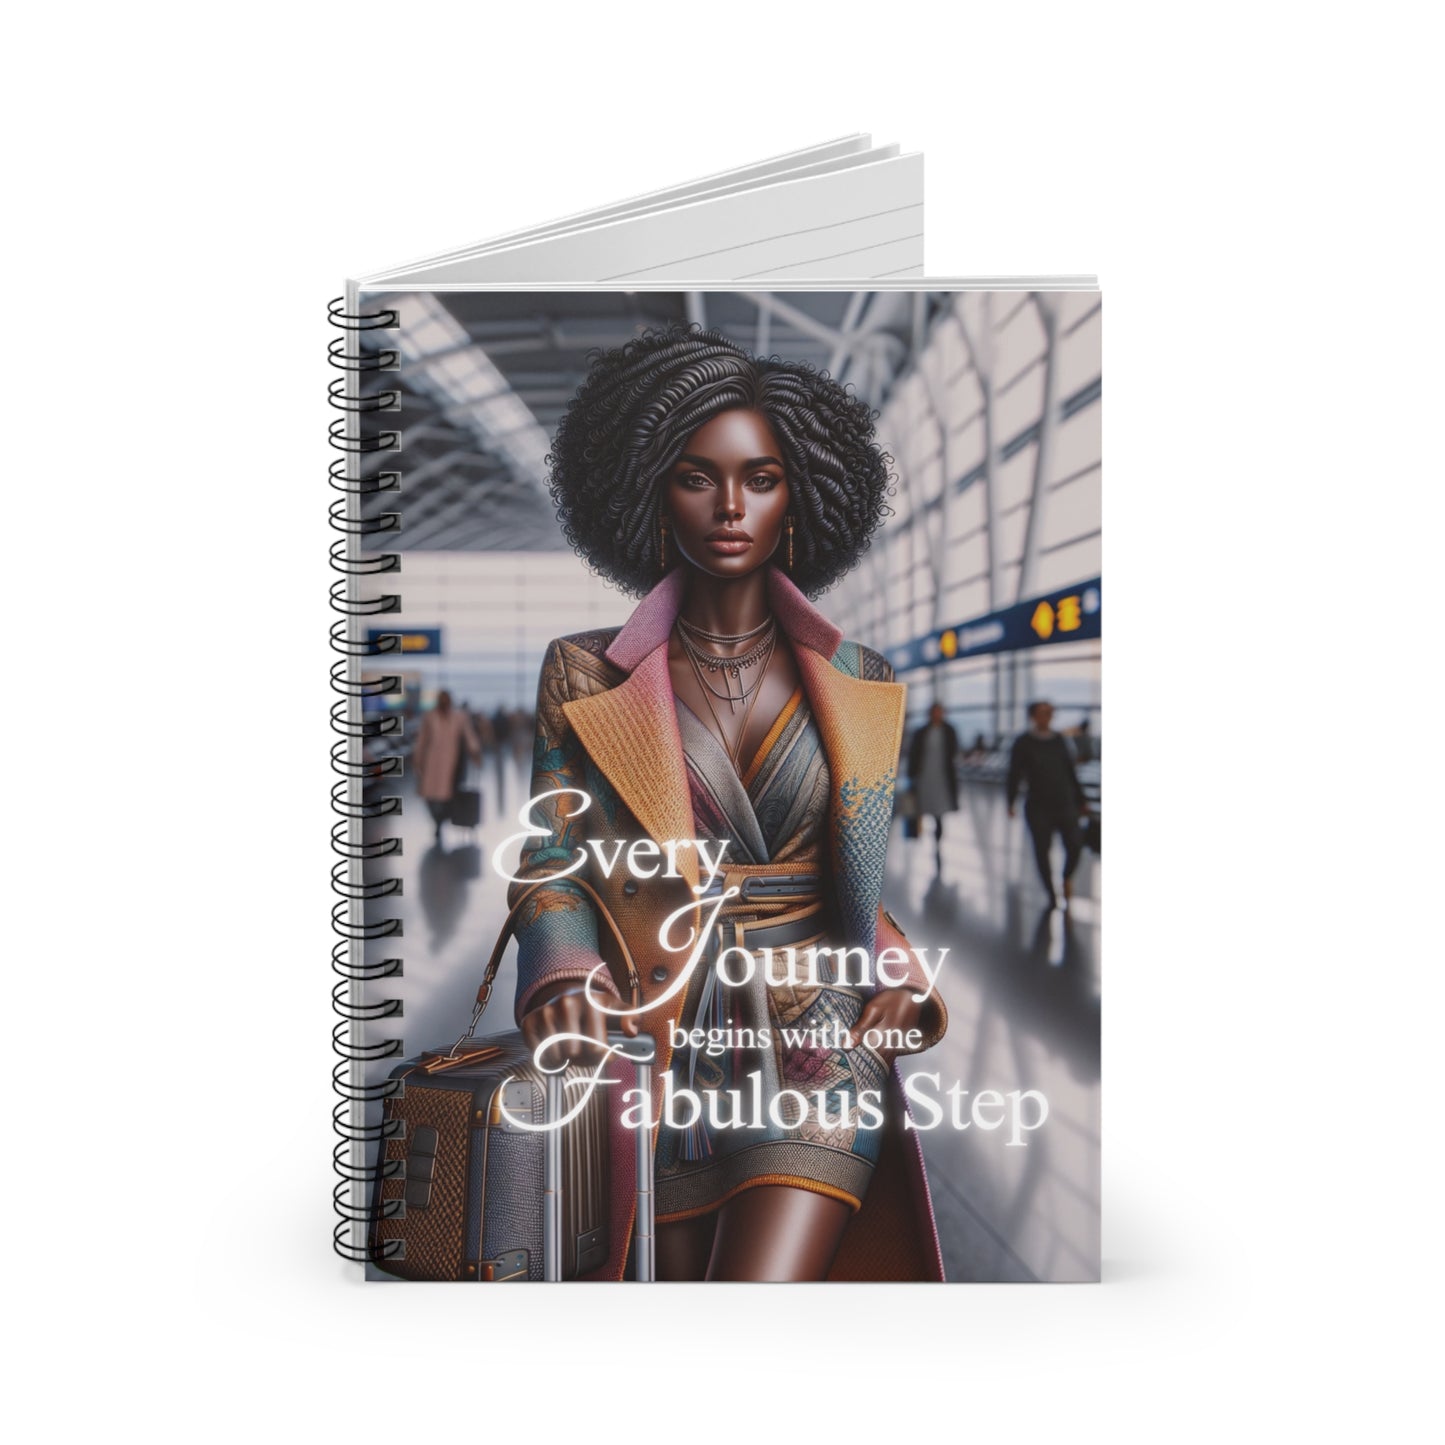 Every Journey Begin With One Fabulous Step Travel Journal